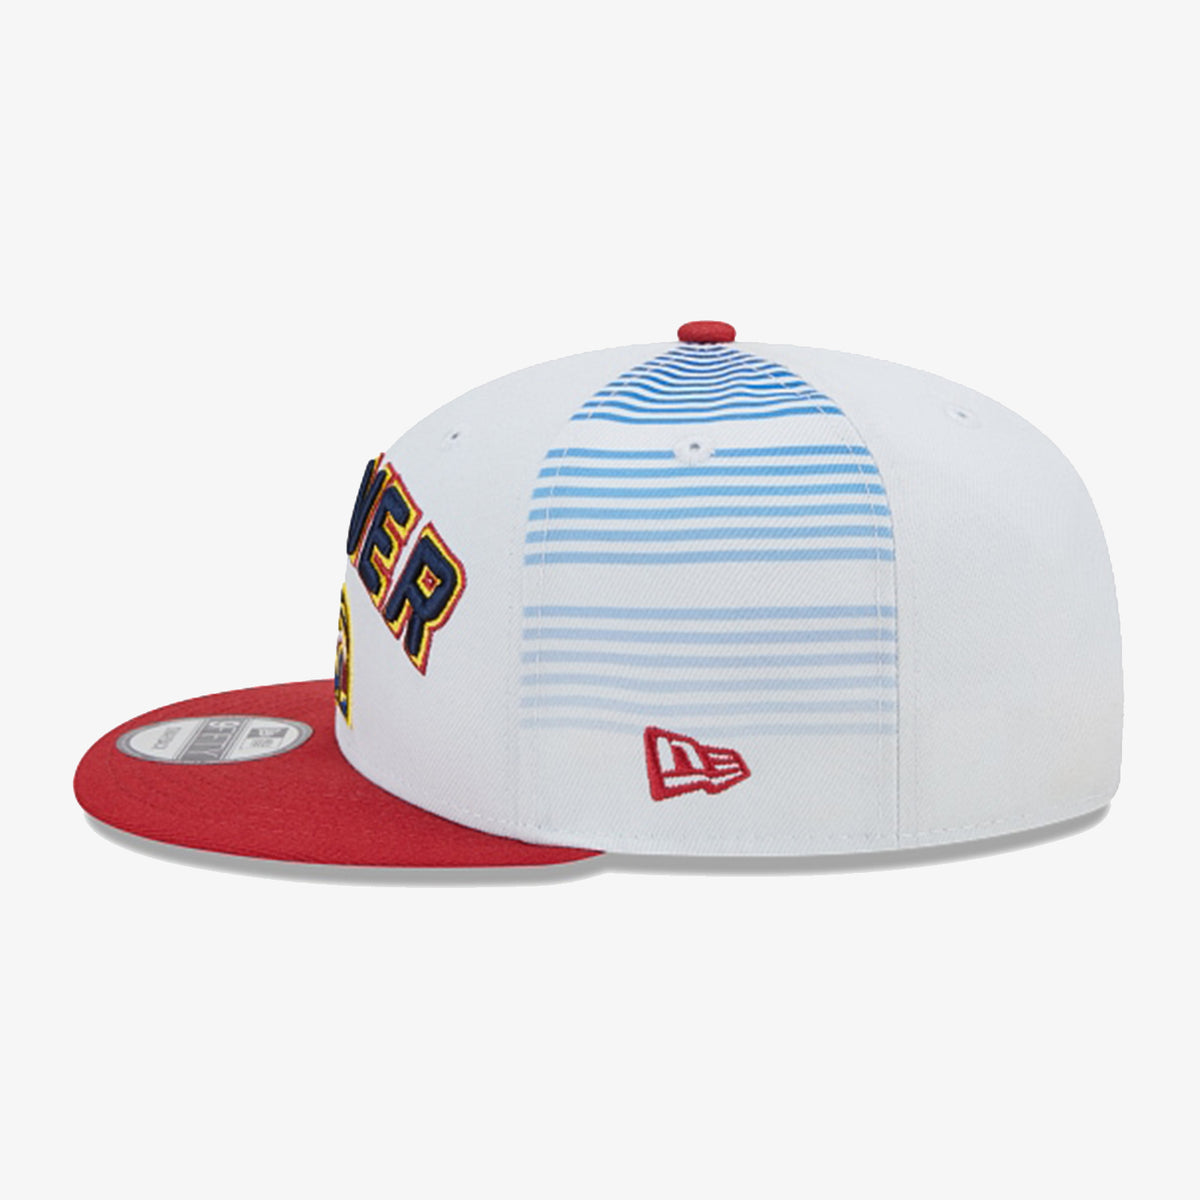 Denver Nuggets 9Fifty City Edition Snapback